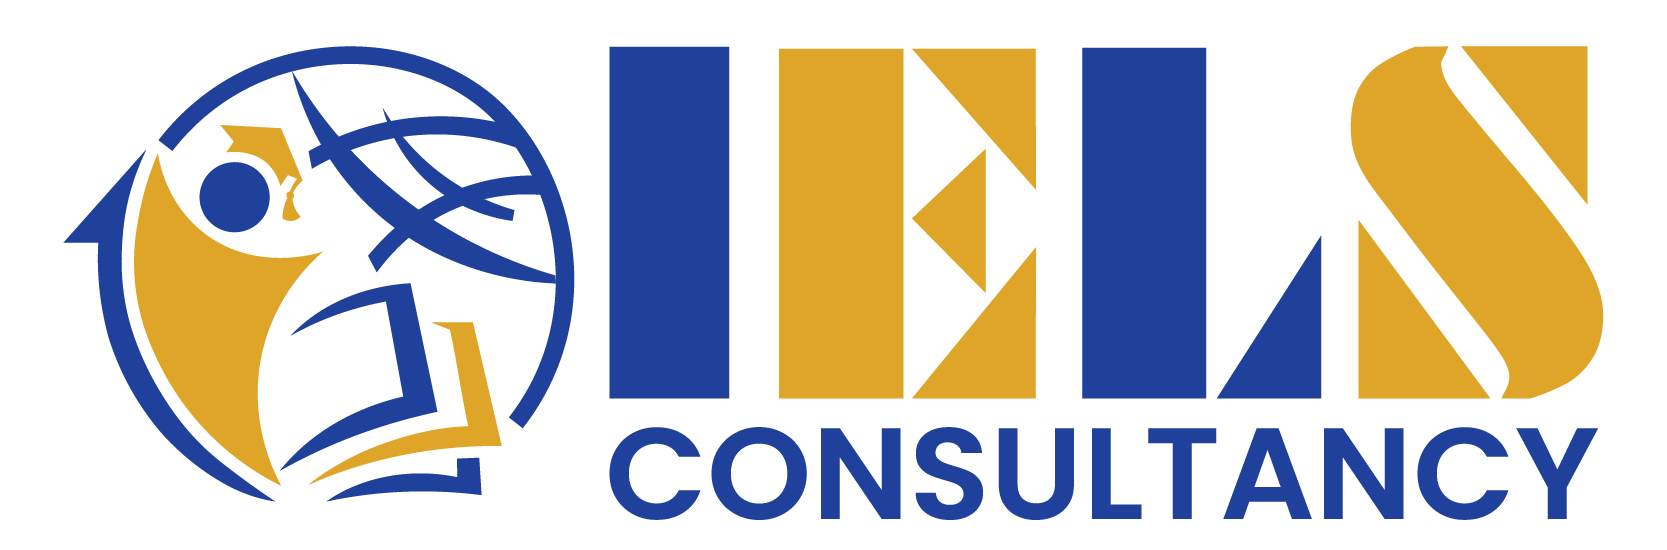 IELS CONSULTANCY SERVICES-04